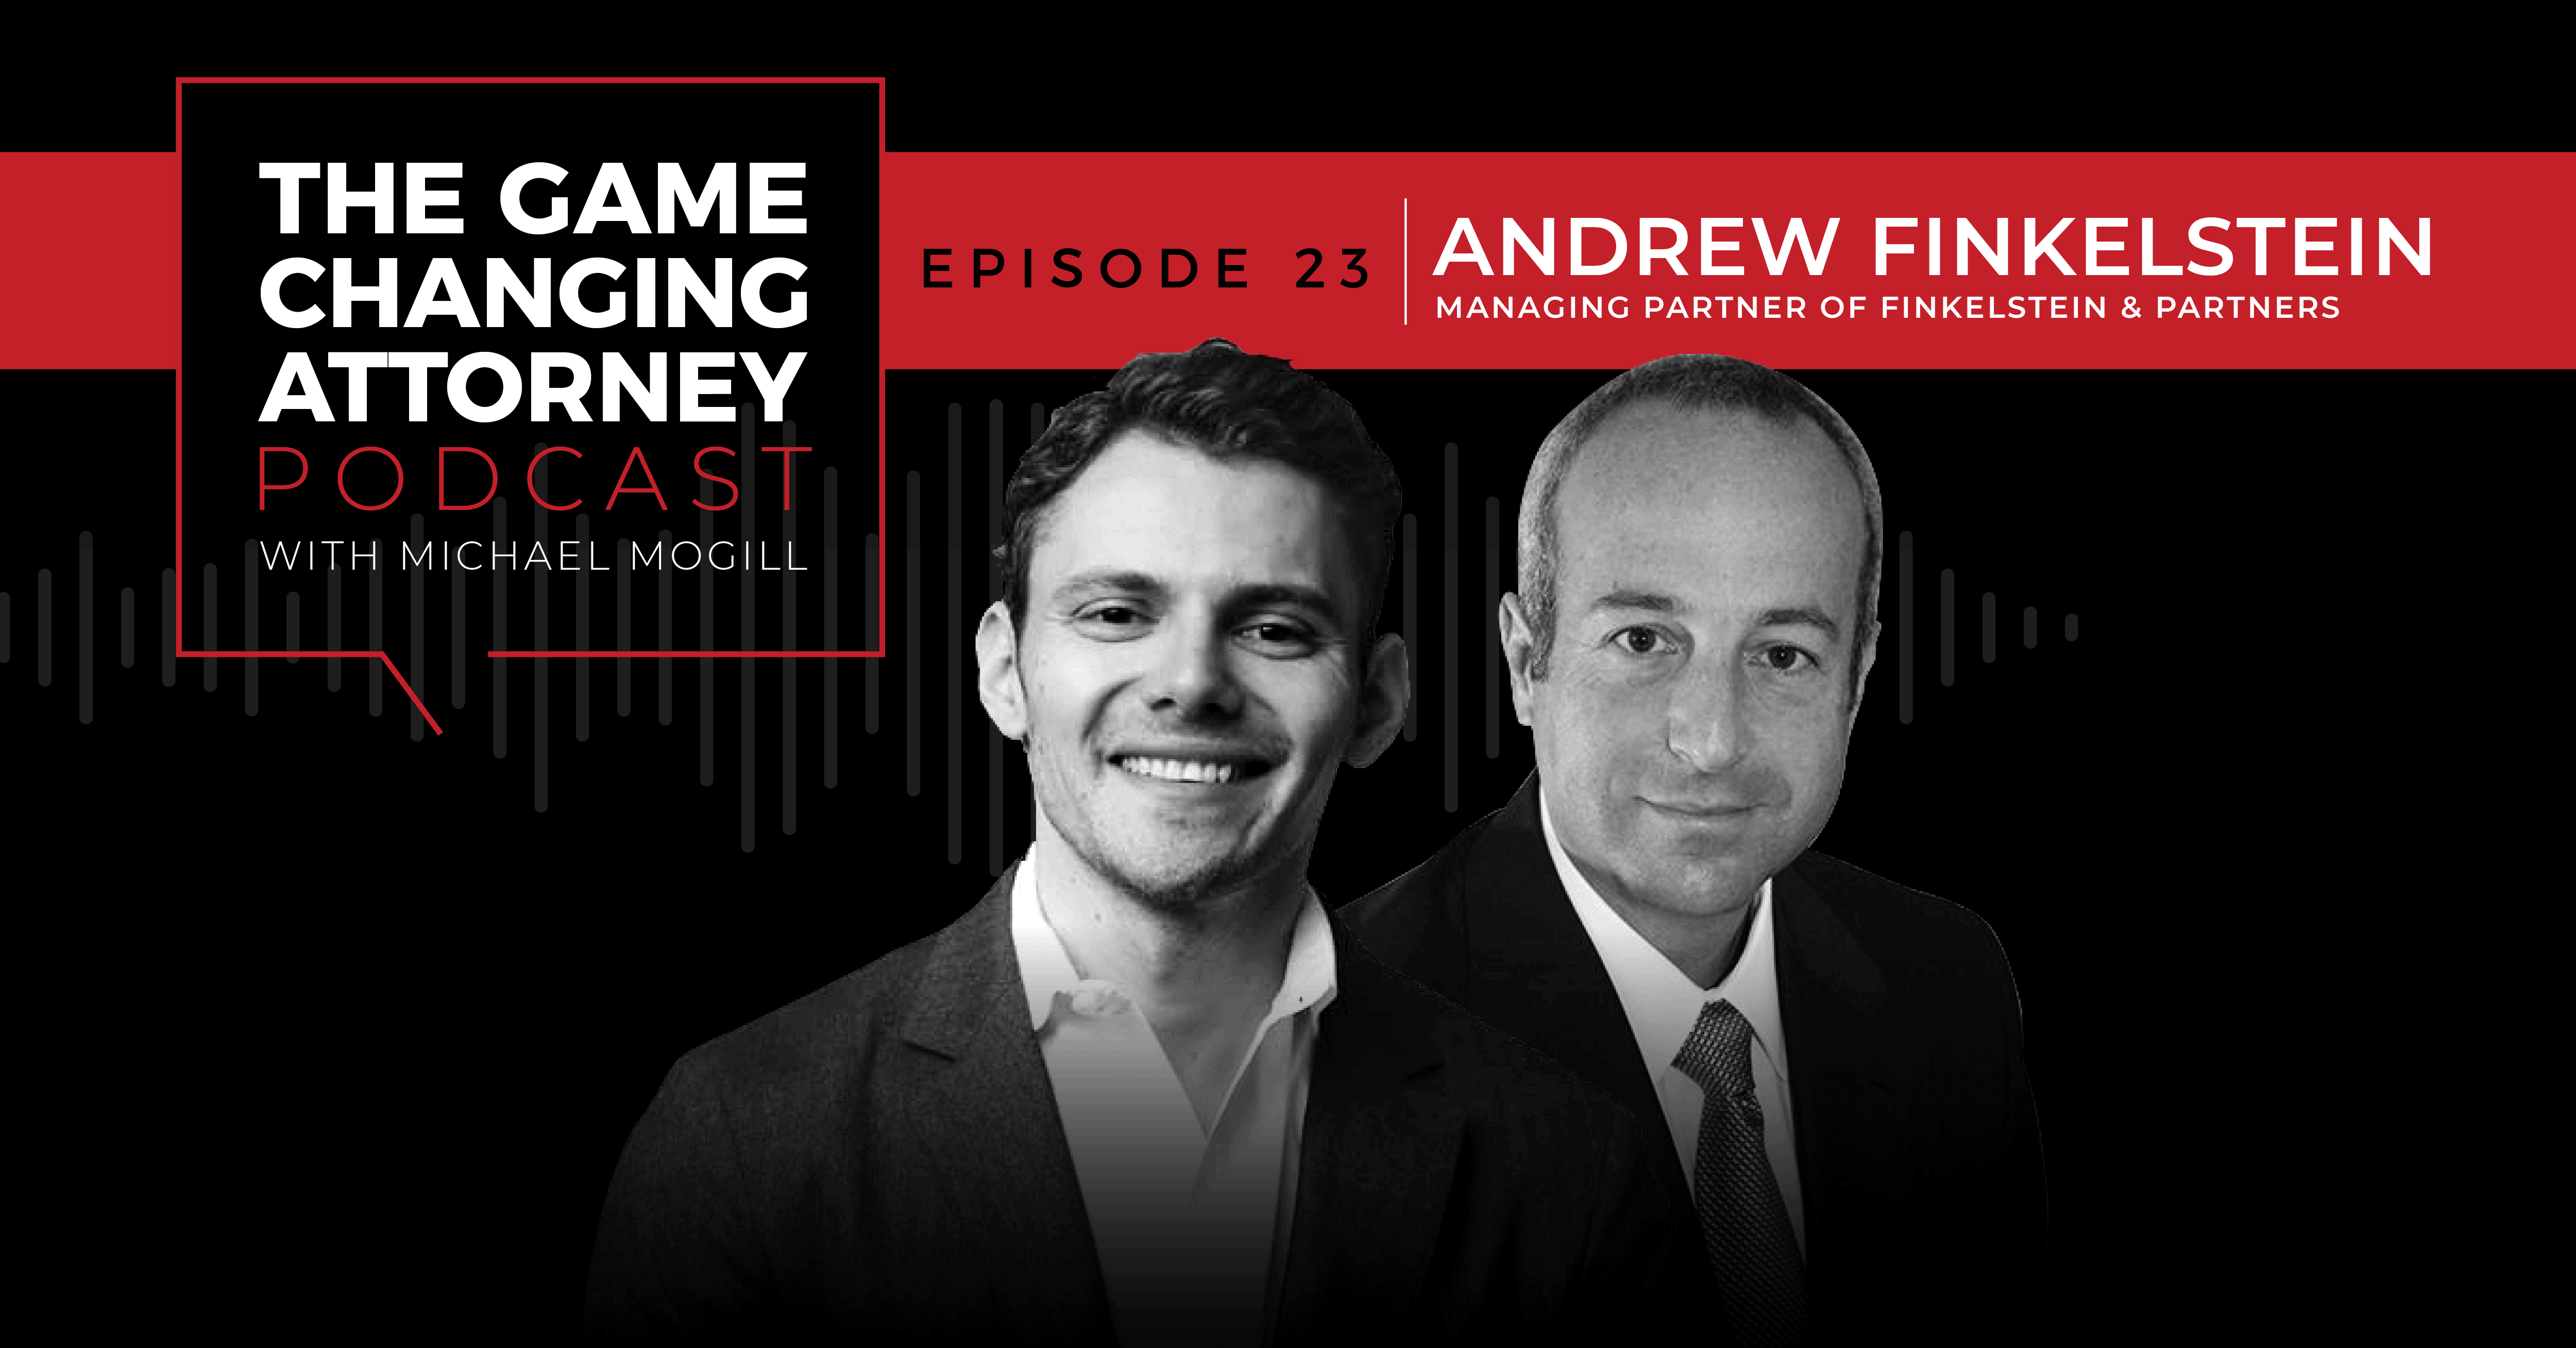 EPISODE 23 — Andrew Finkelstein — Building the Law Firm of the Future